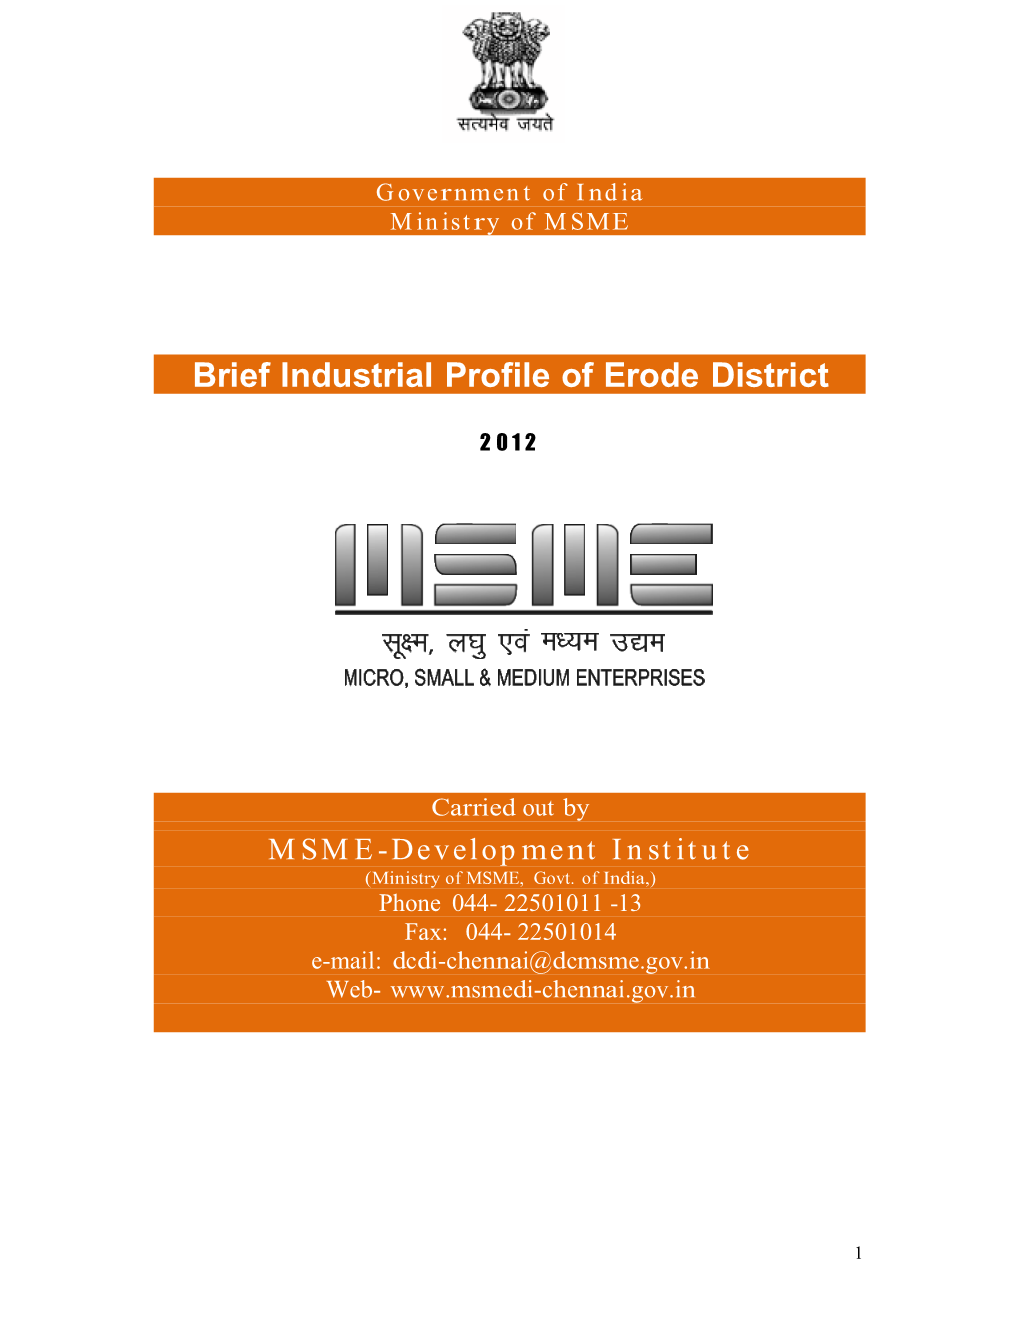 Brief Industrial Profile of Erode District